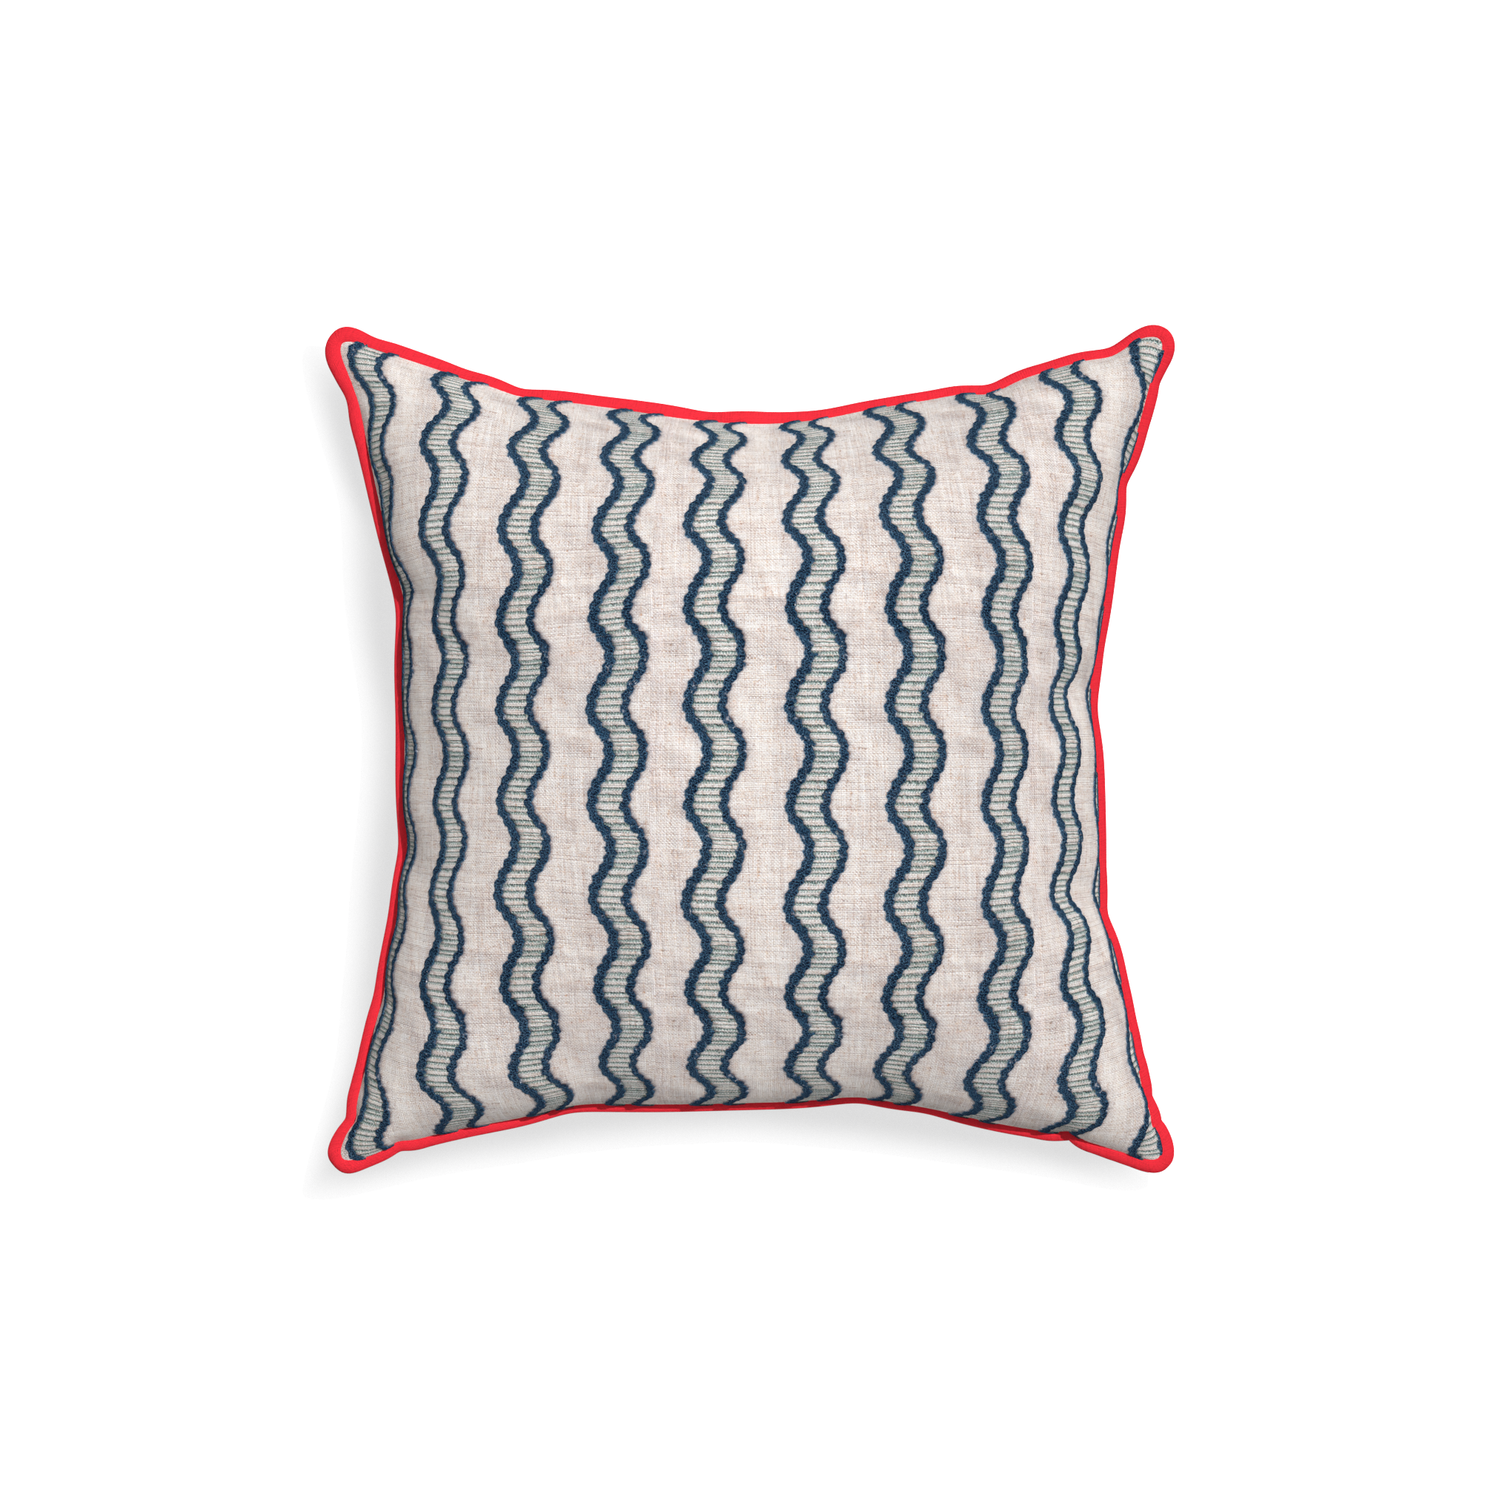 18-square beatrice custom embroidered wavepillow with cherry piping on white background